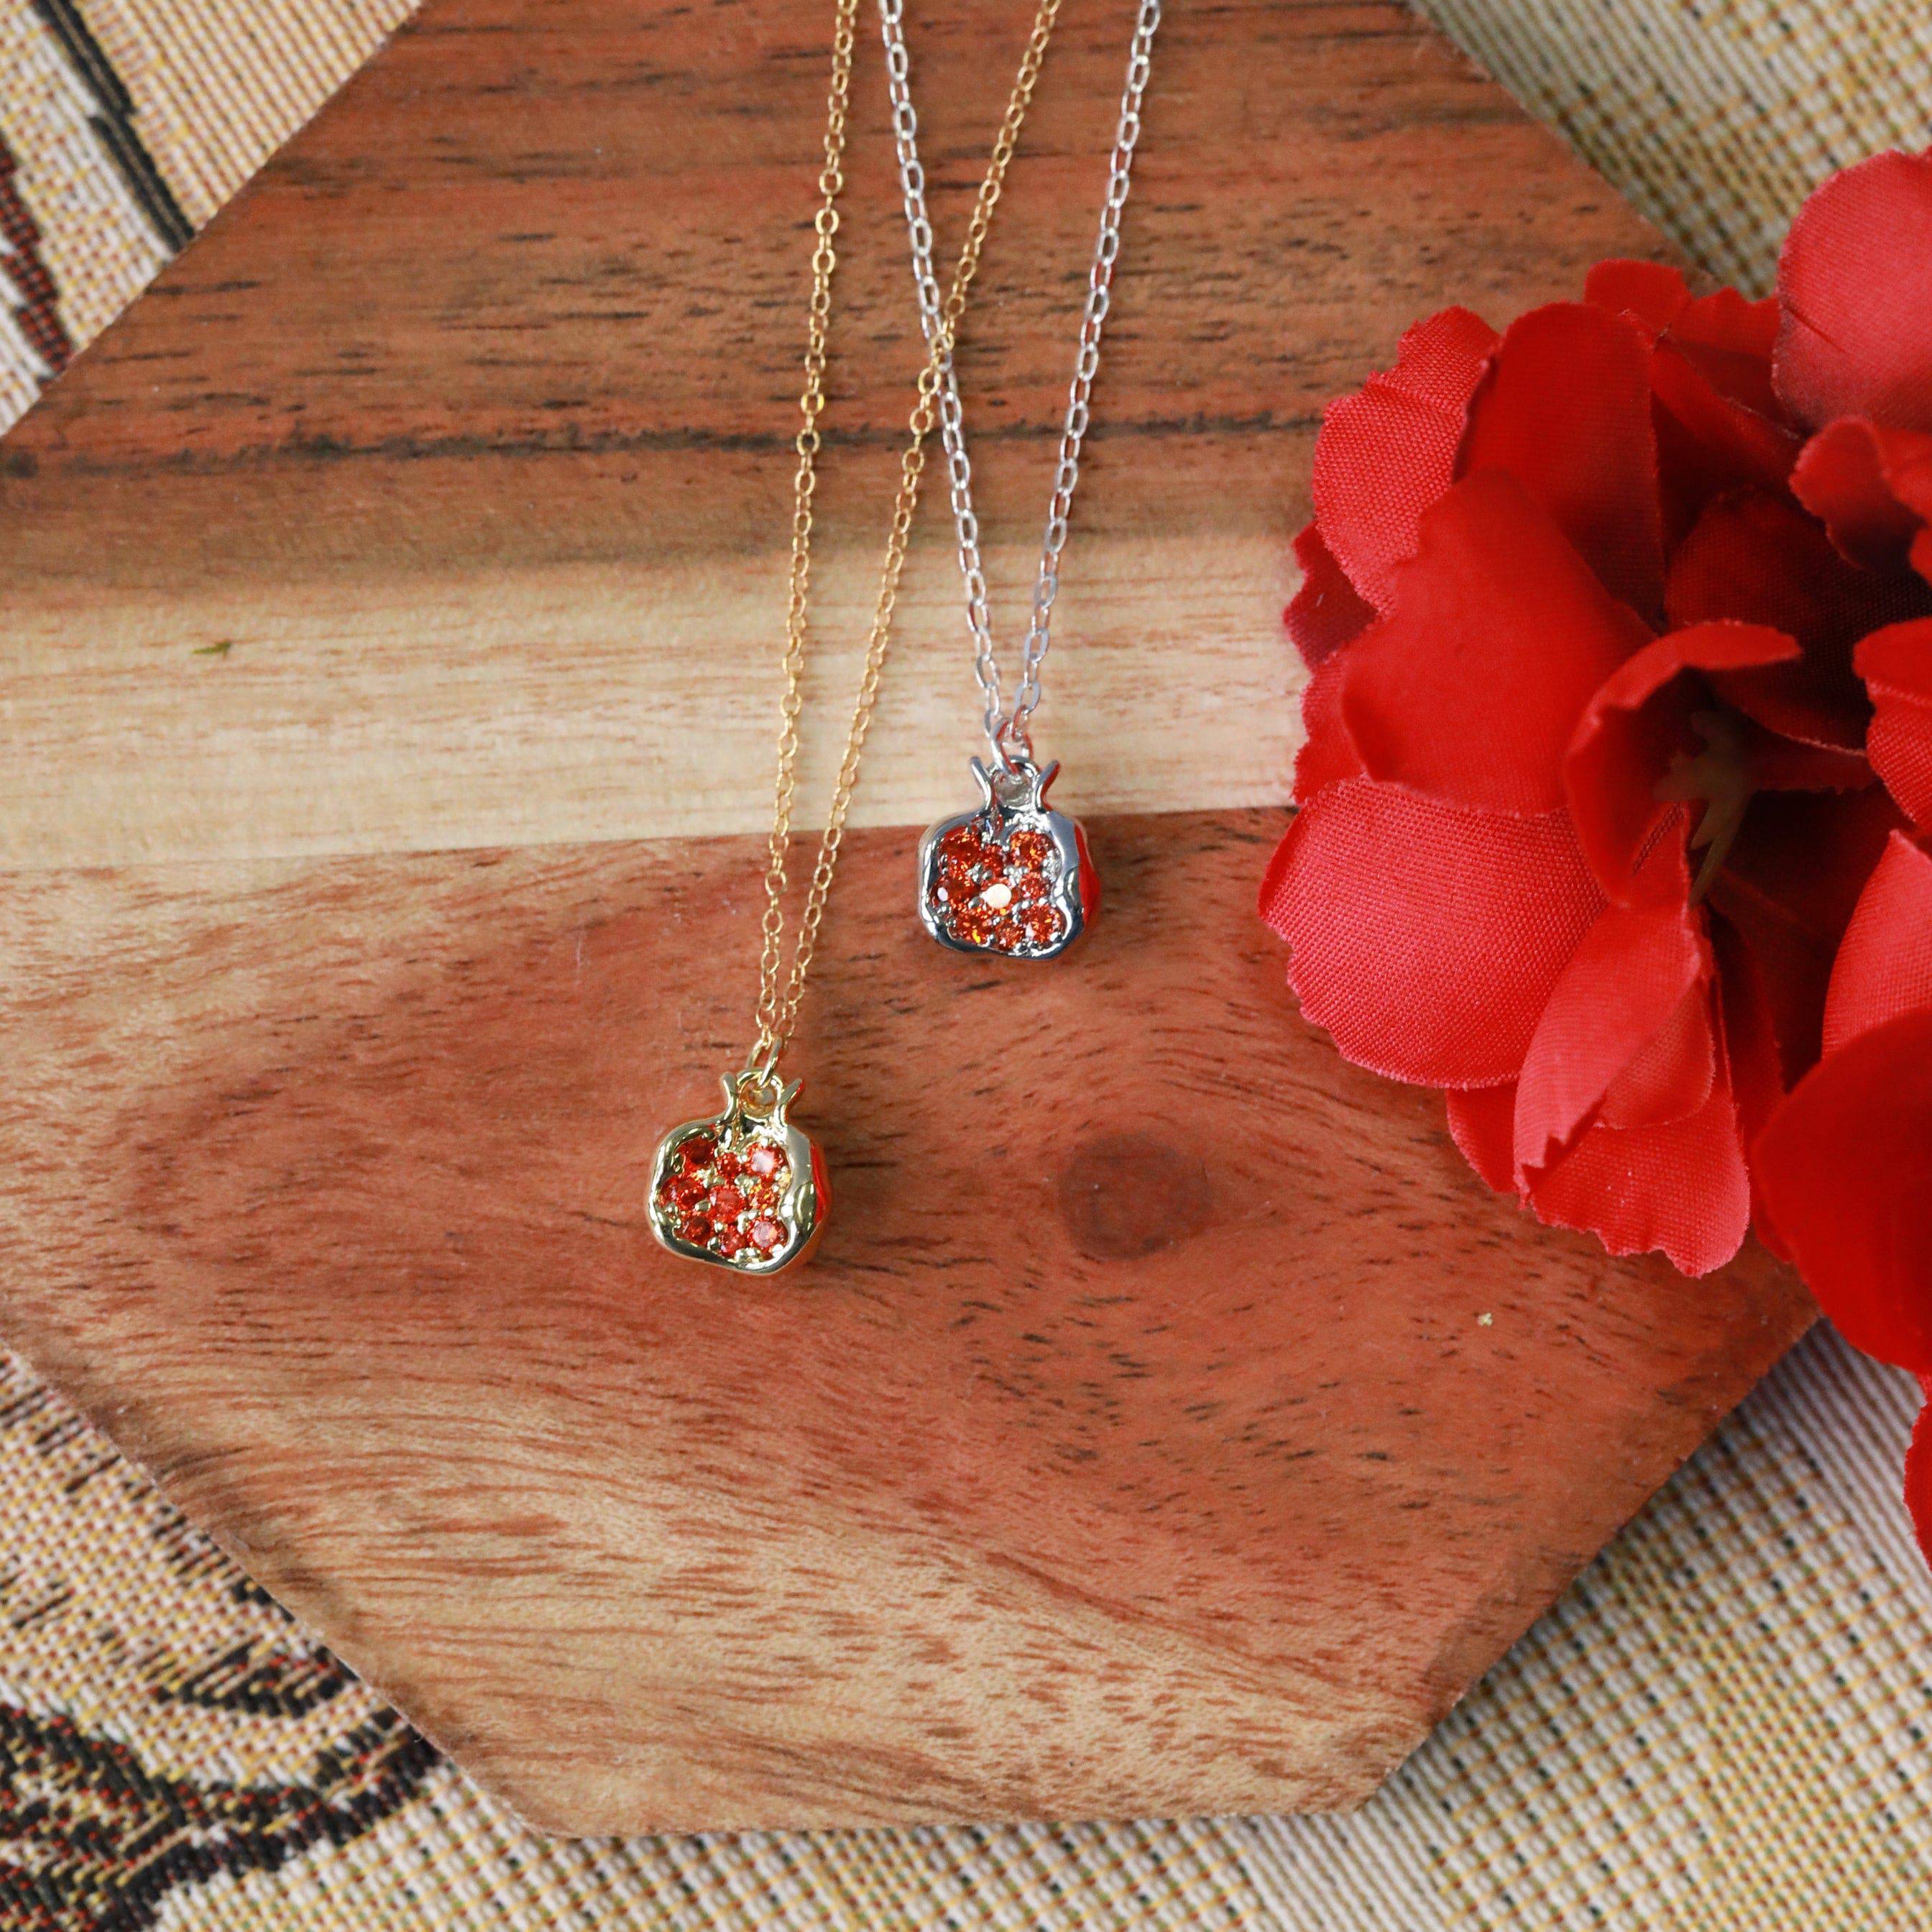 Pomegranate Charm Necklace - The Gilded Witch